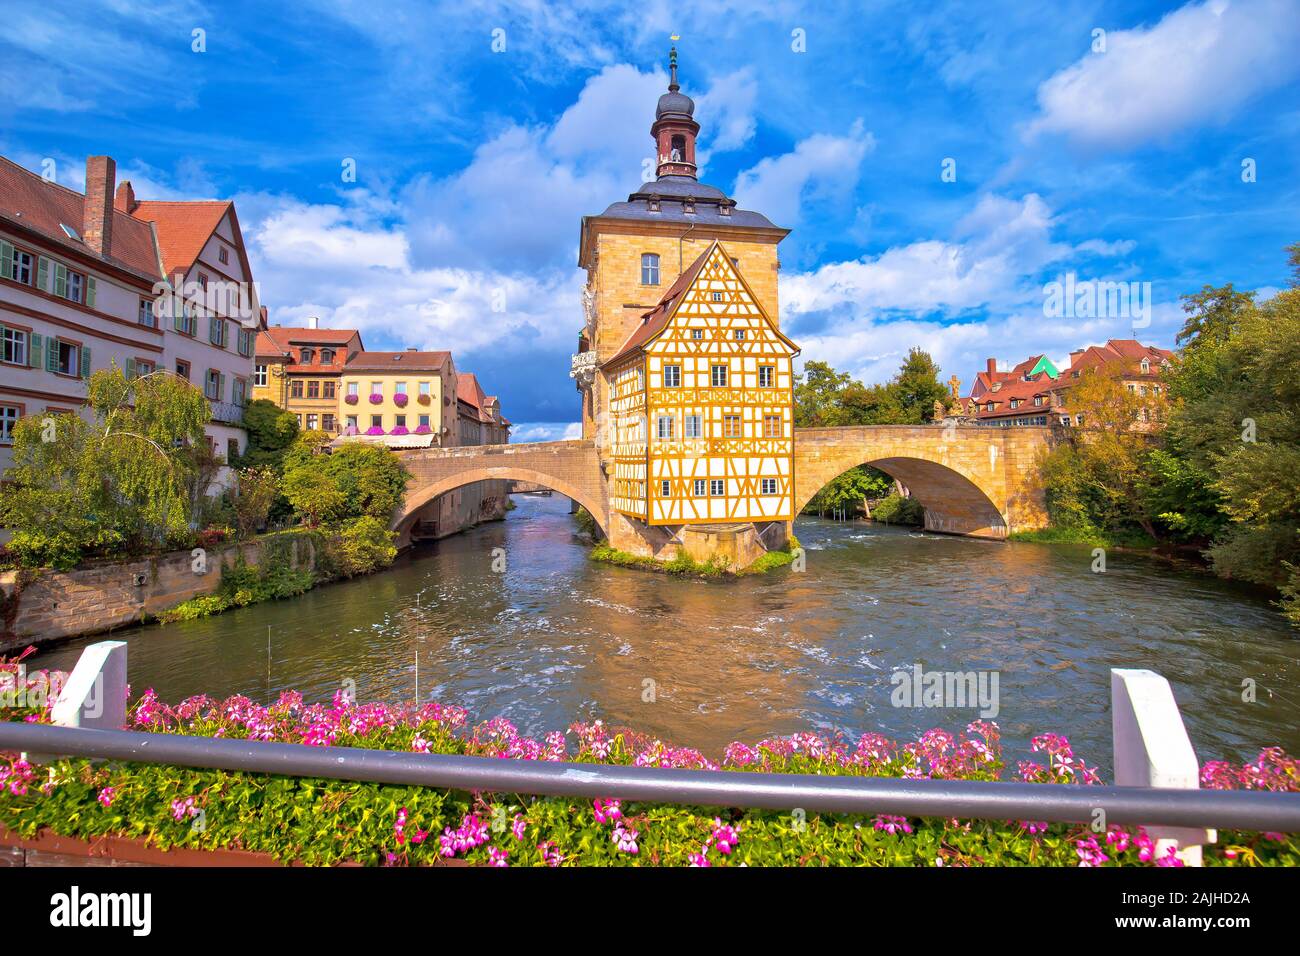 Bamberg. Scenic view of Old Town Hall of Bamberg (Altes Rathaus) with two bridges over the Regnitz river, Upper Franconia, Bavaria region of Germany Stock Photo